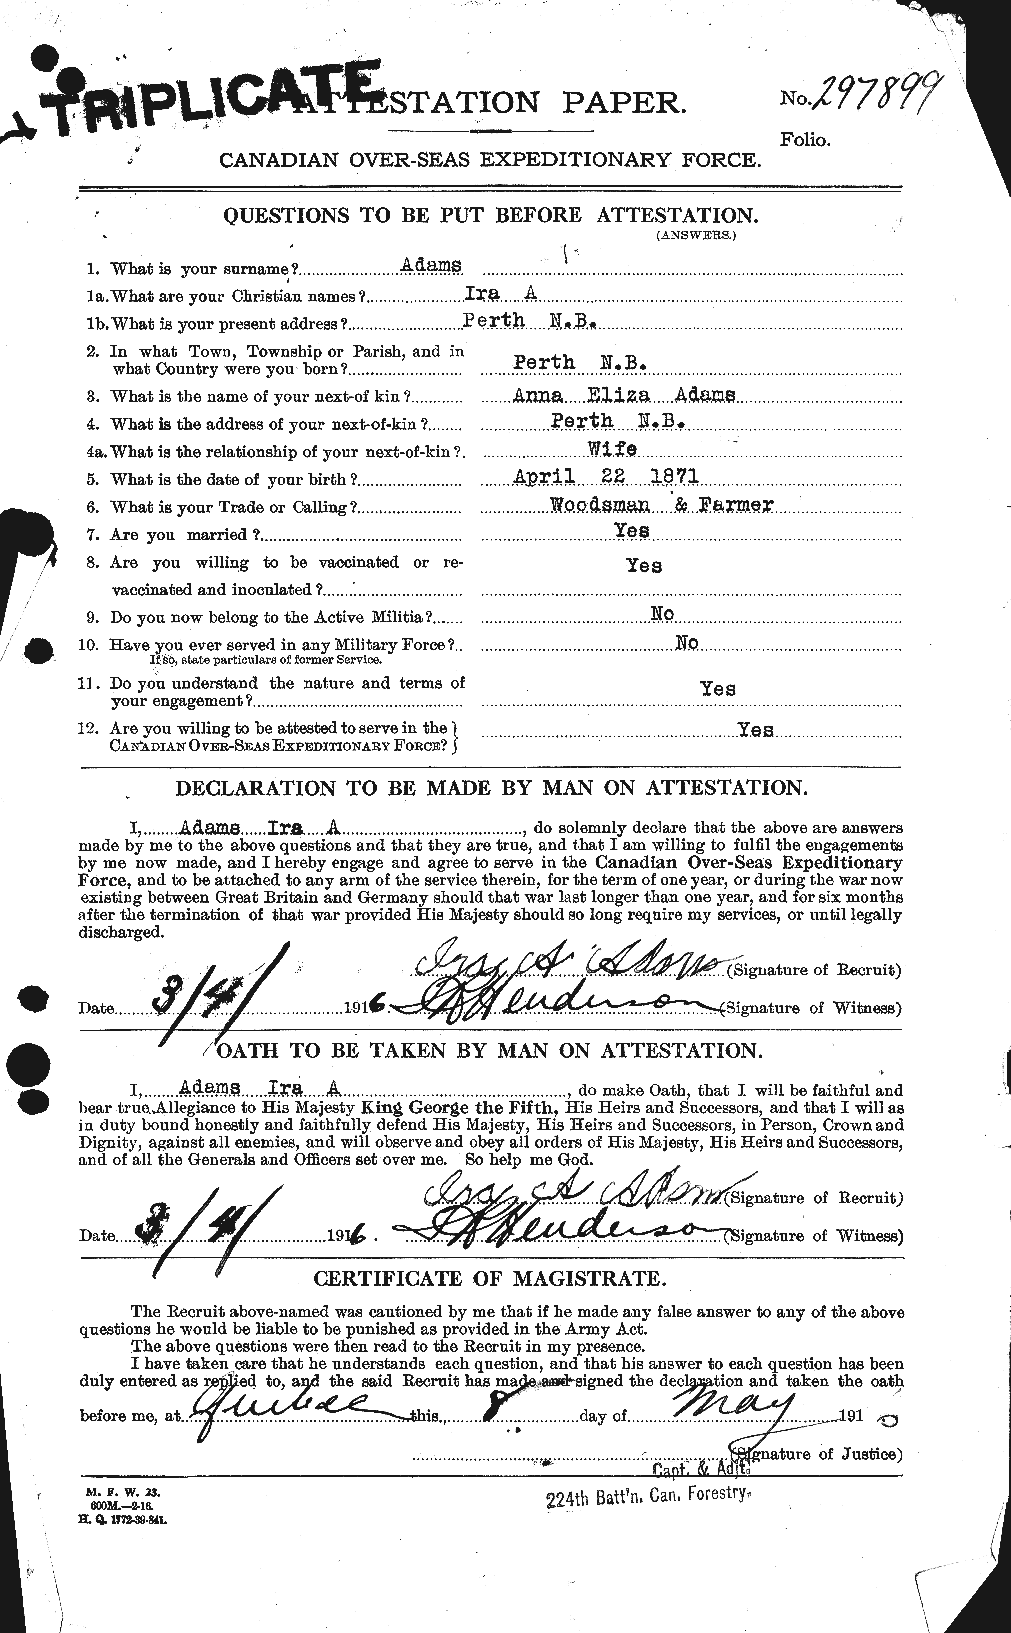 Personnel Records of the First World War - CEF 203214a